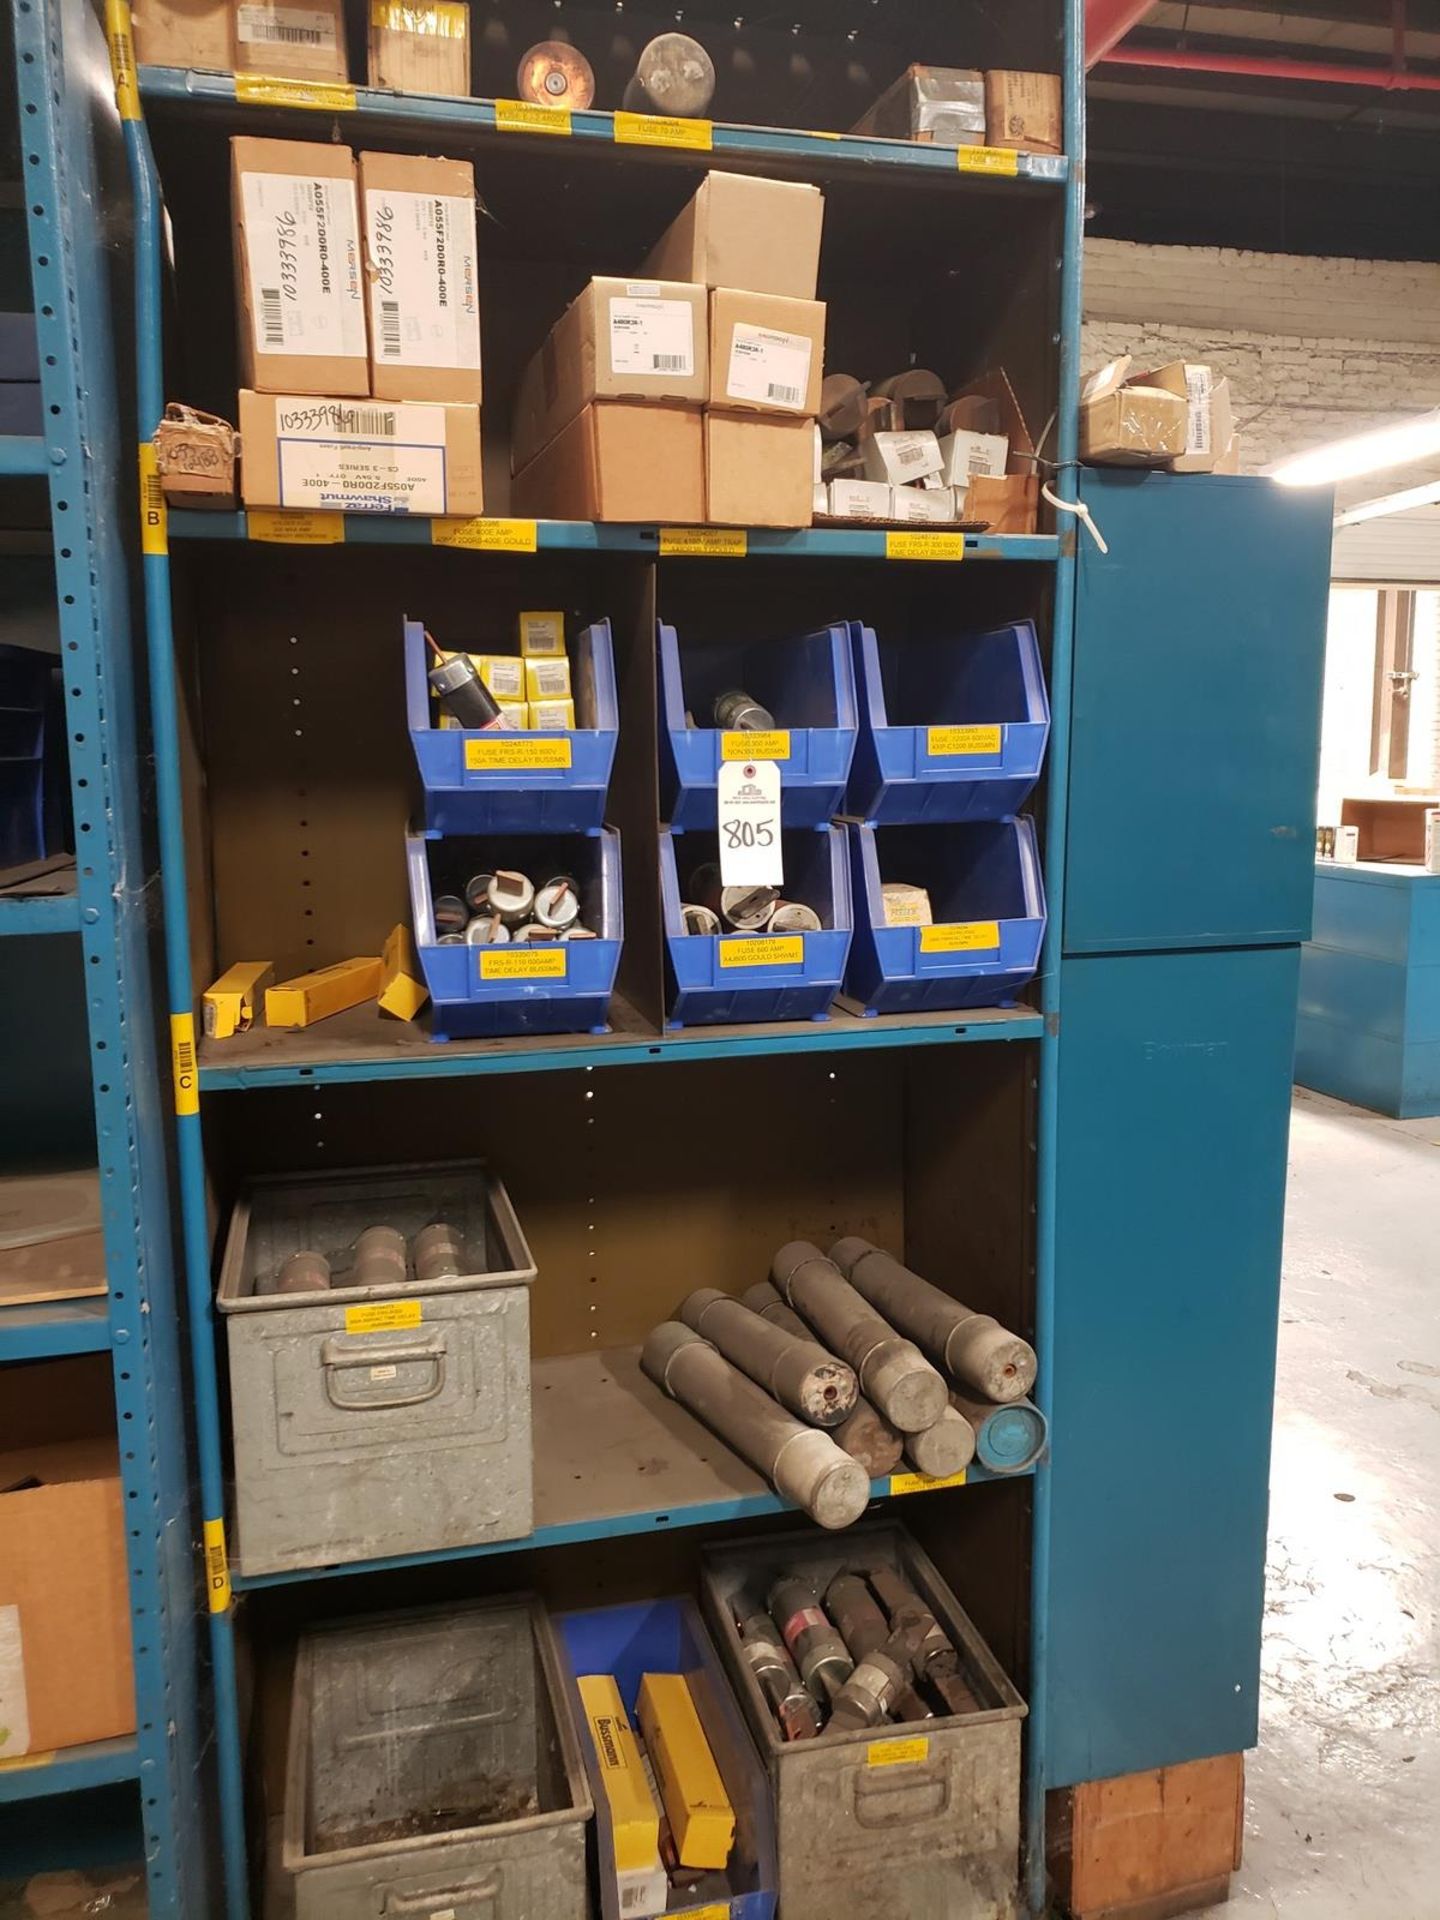 Contents of Storage Shelf Section, Spare Parts | Rig Fee $125